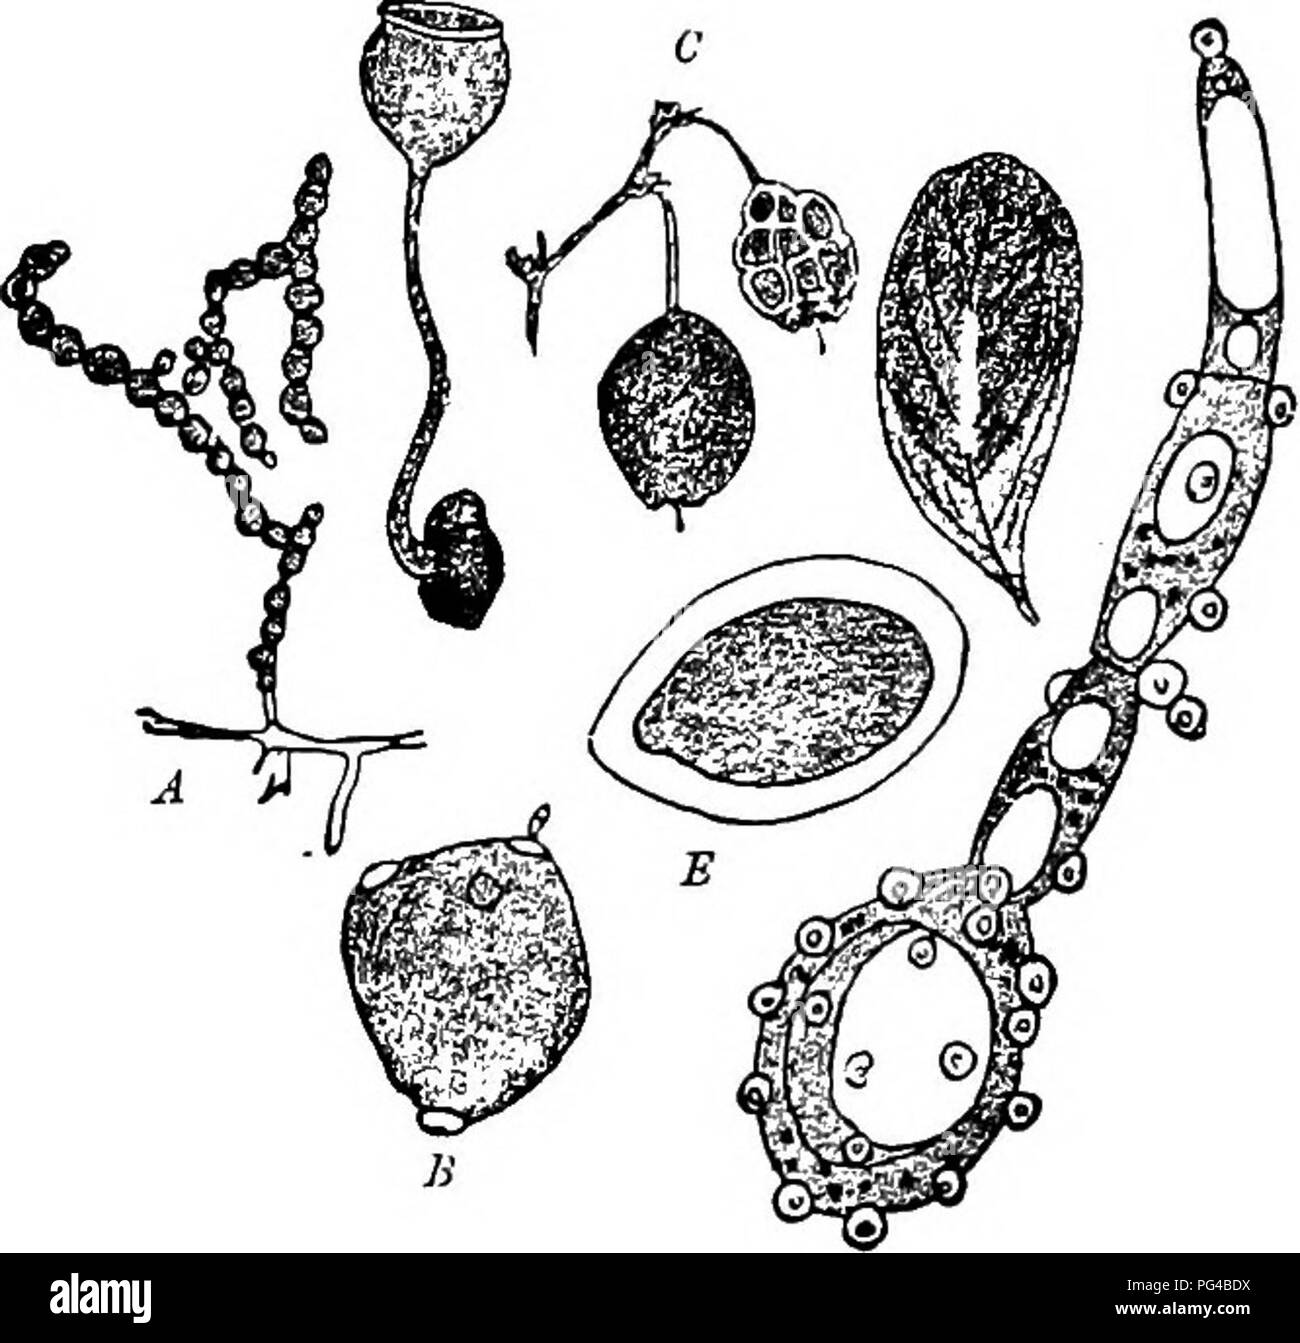 . Diseases of plants induced by cryptogamic parasites : introduction to the study of pathogenic Fungi, slime-Fungi, bacteria, &amp; Algae . Plant diseases; Parasitic plants; Fungi. 260 ASCOMYCETES. larger and four smaller spores, the latter appearing to be rudi- mentary and incapable of germination. ScL baccarum Sehroet.^ (Britain).^ The sclerotium disease of the bilberry (Voce. Myrtillus). This varies from the other species in having round conidia incapable of germinating in v?ater, in having more robust apotbecial beakers, and in lacking rhizoids. The spores are similar in number and arrange Stock Photo